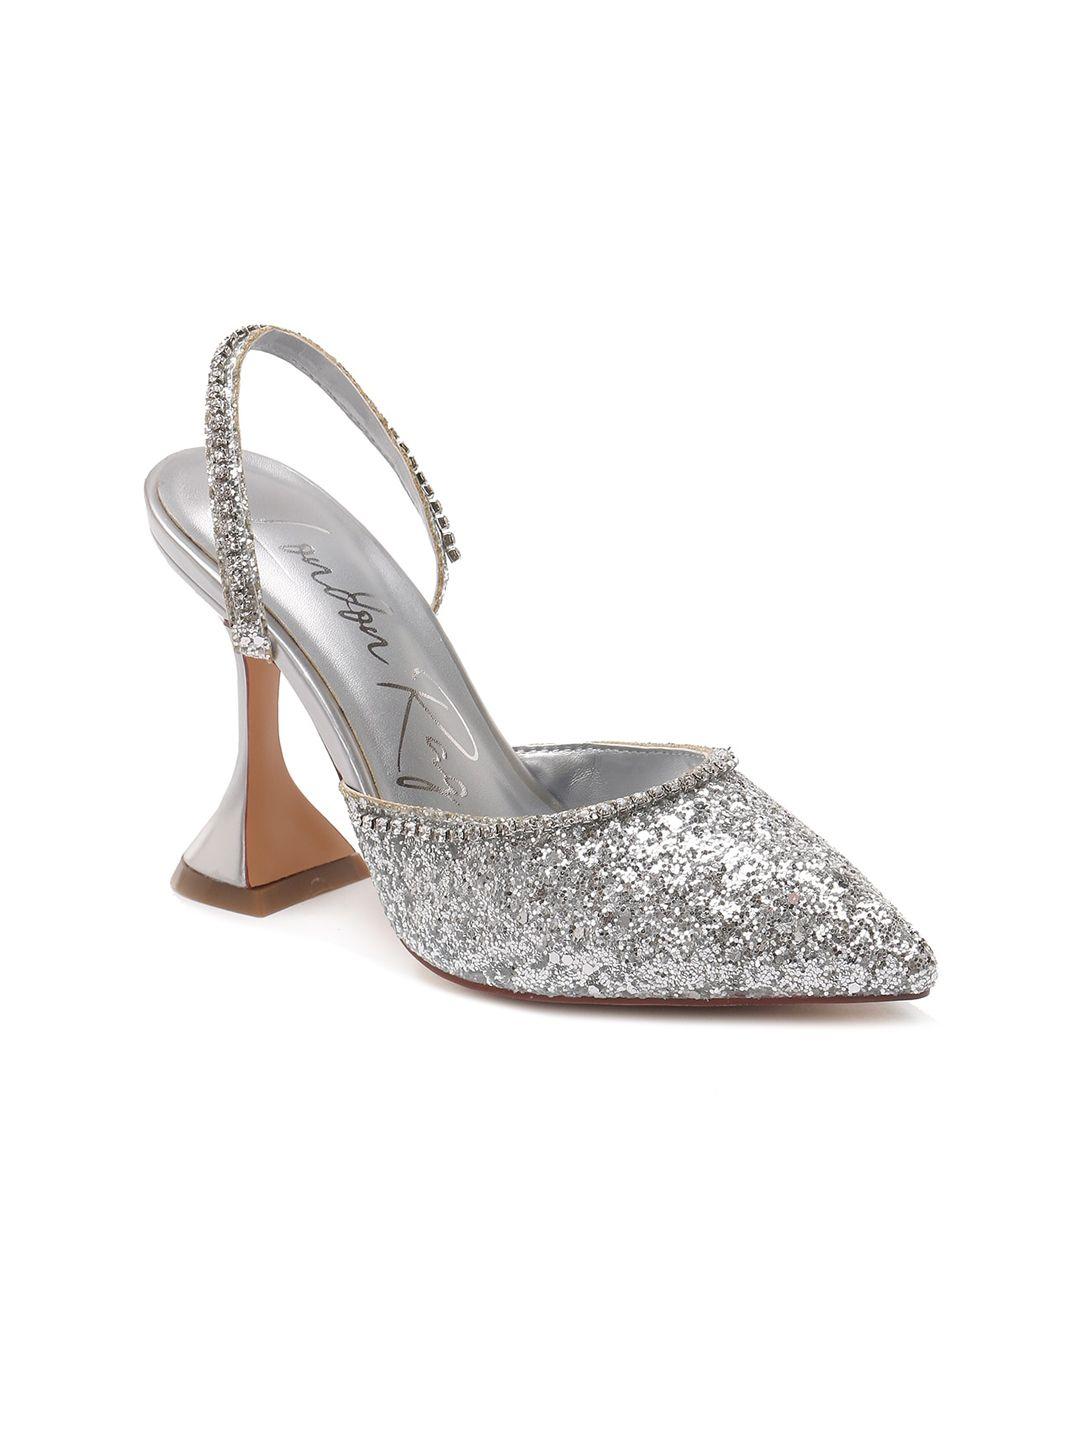 london-rag-silver-toned-textured-party-block-heels